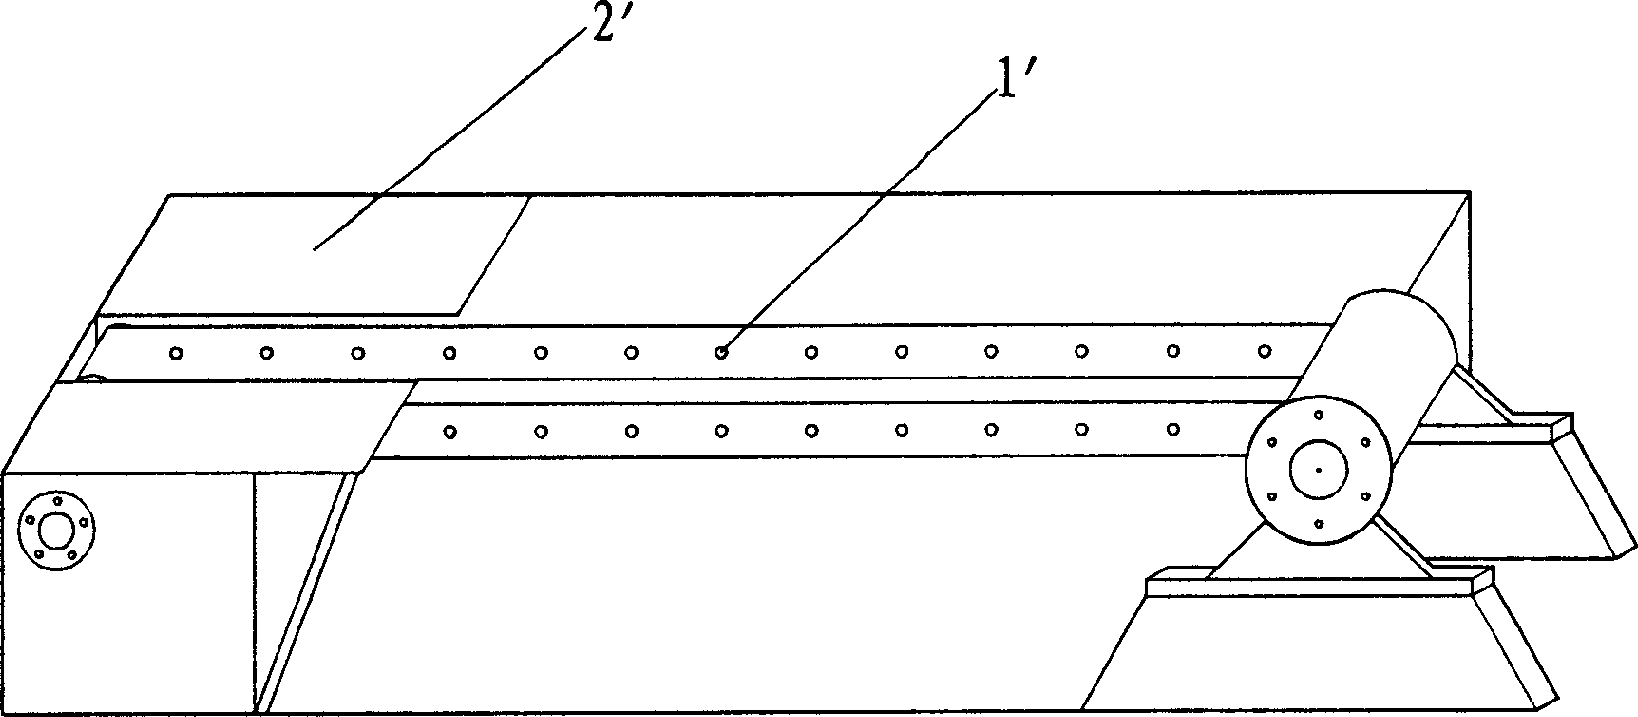 Modular sleeve forming method and its device